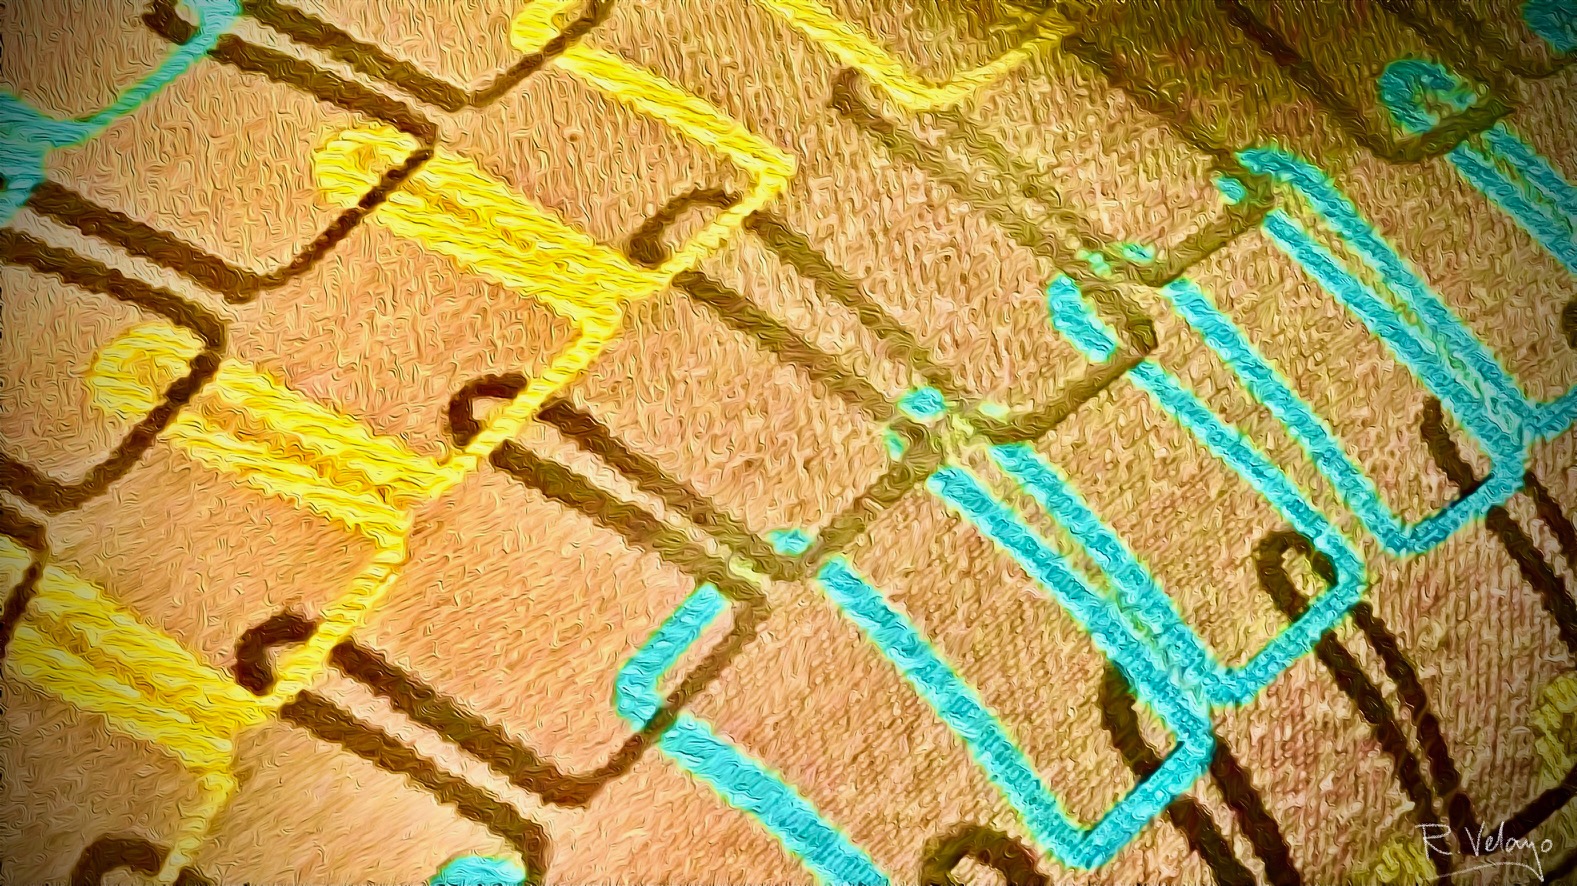 "YELLOW, BROWN, BLUE MOD DESIGN STITCHING ON FABRIC" [Created: 6/26/2021]